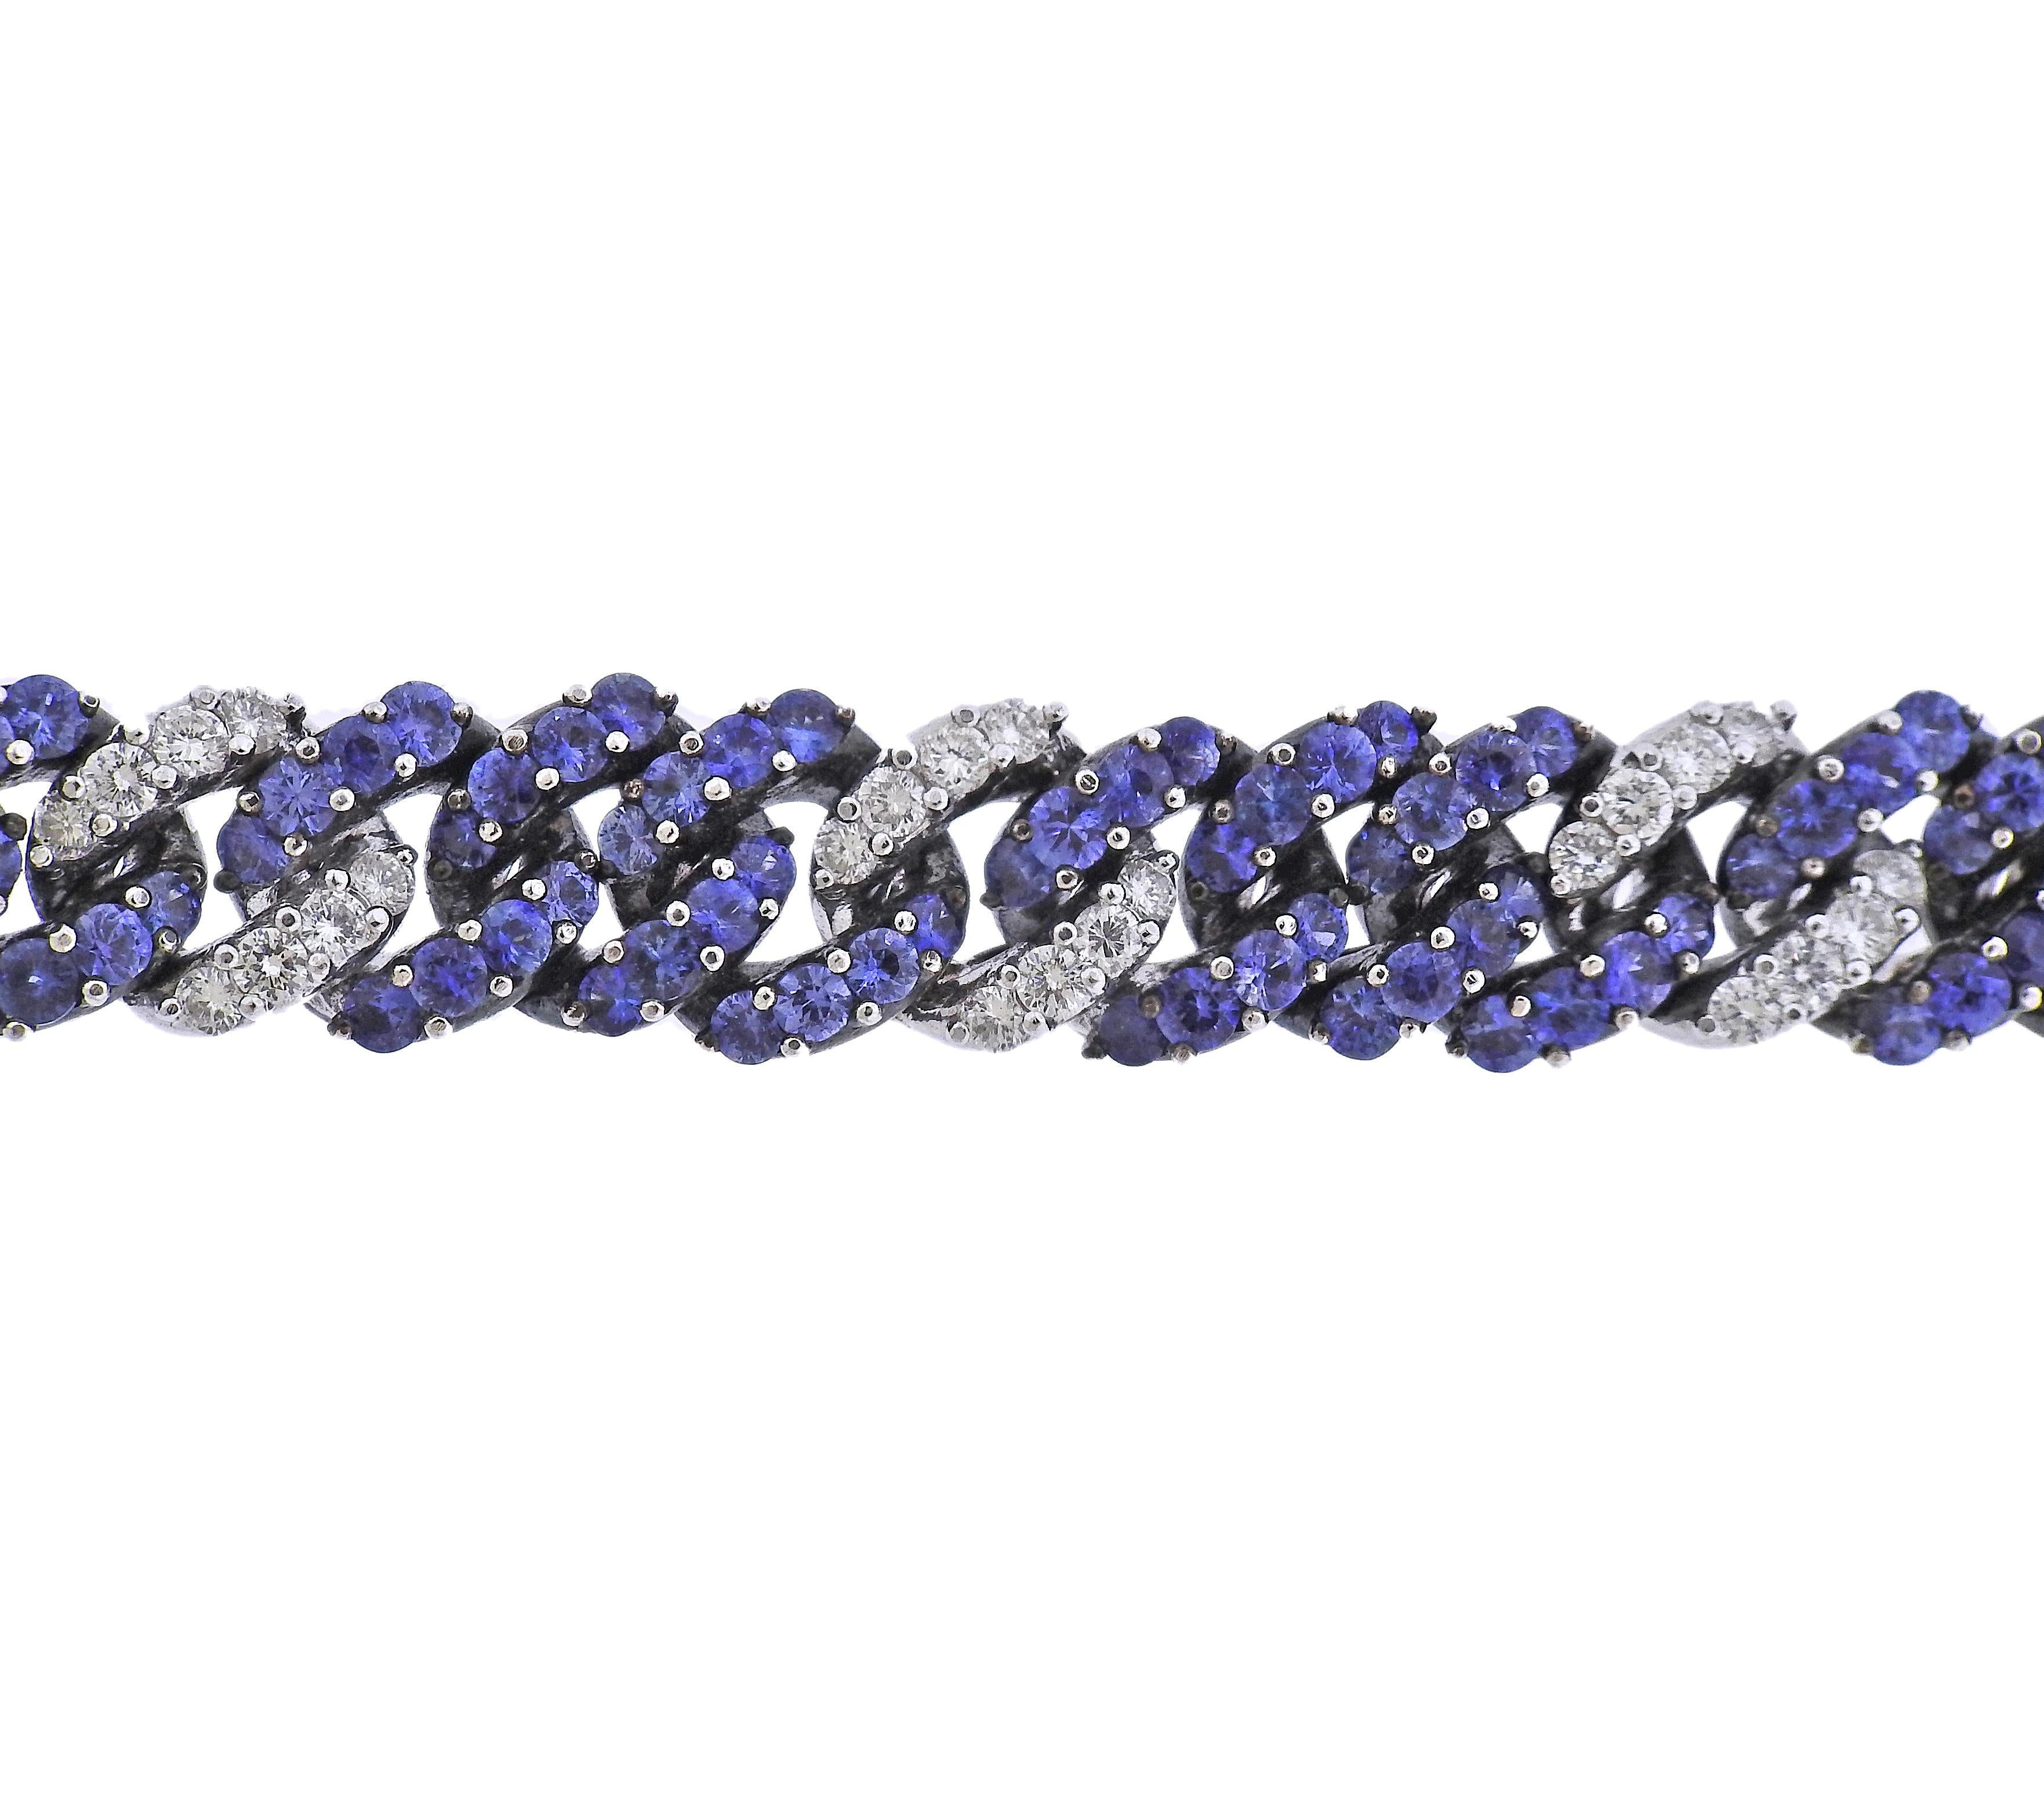 18k gold link bracelet, with approx. 15ctw in blue sapphires and 2.50ctw in VS-SI/G-H diamonds. Bracelet is 7 2/8